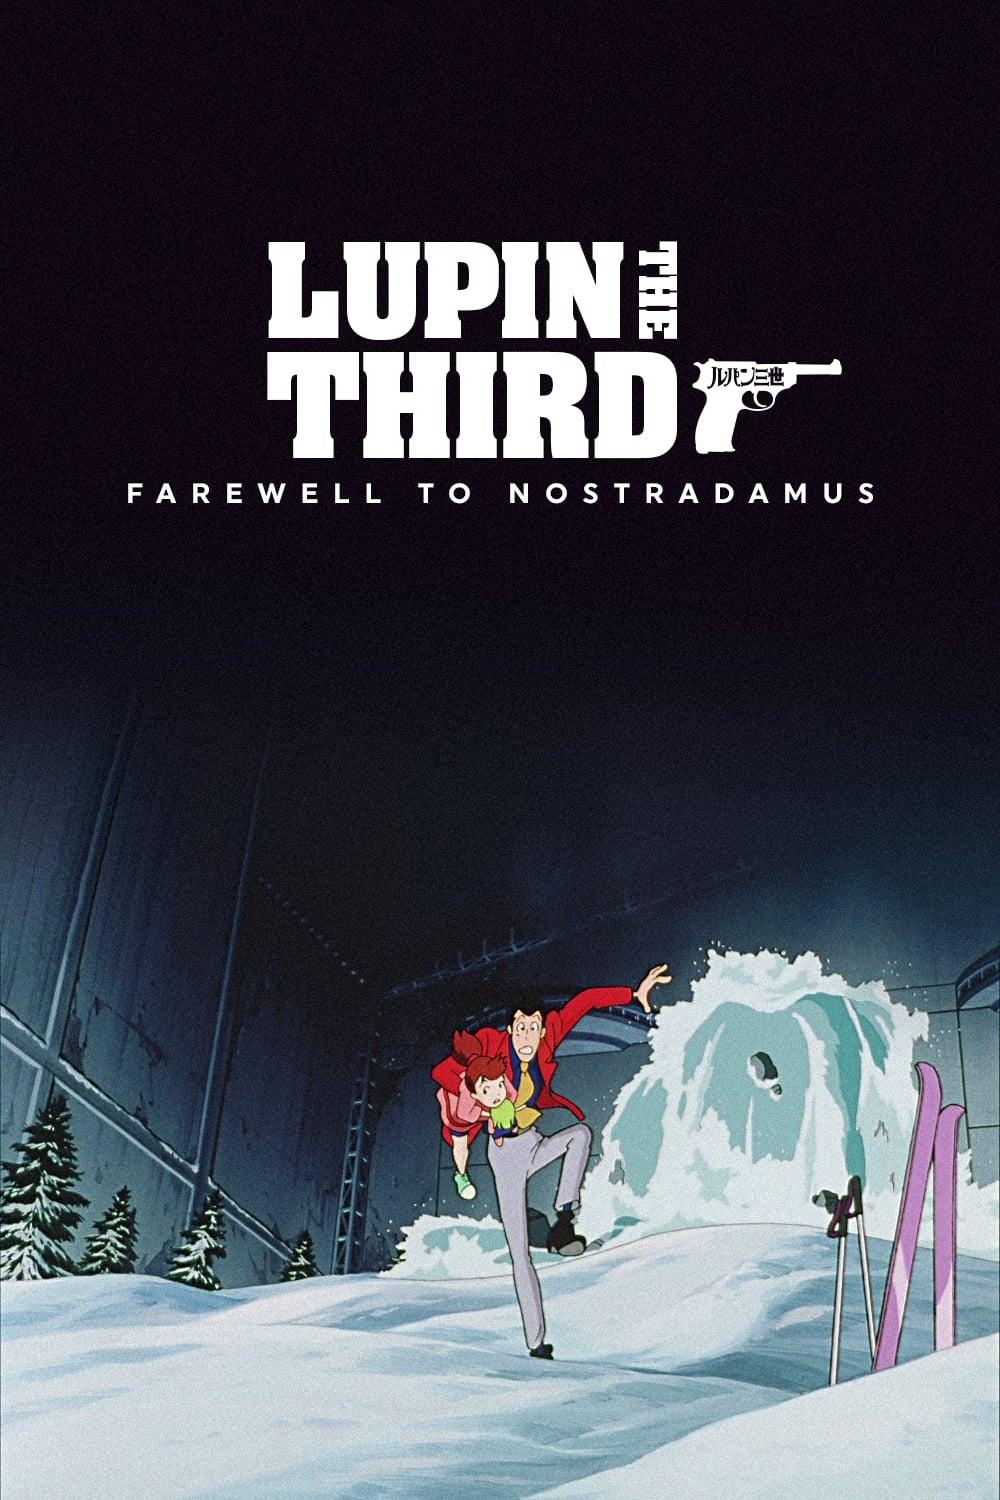 Lupin the Third: Farewell to Nostradamus poster